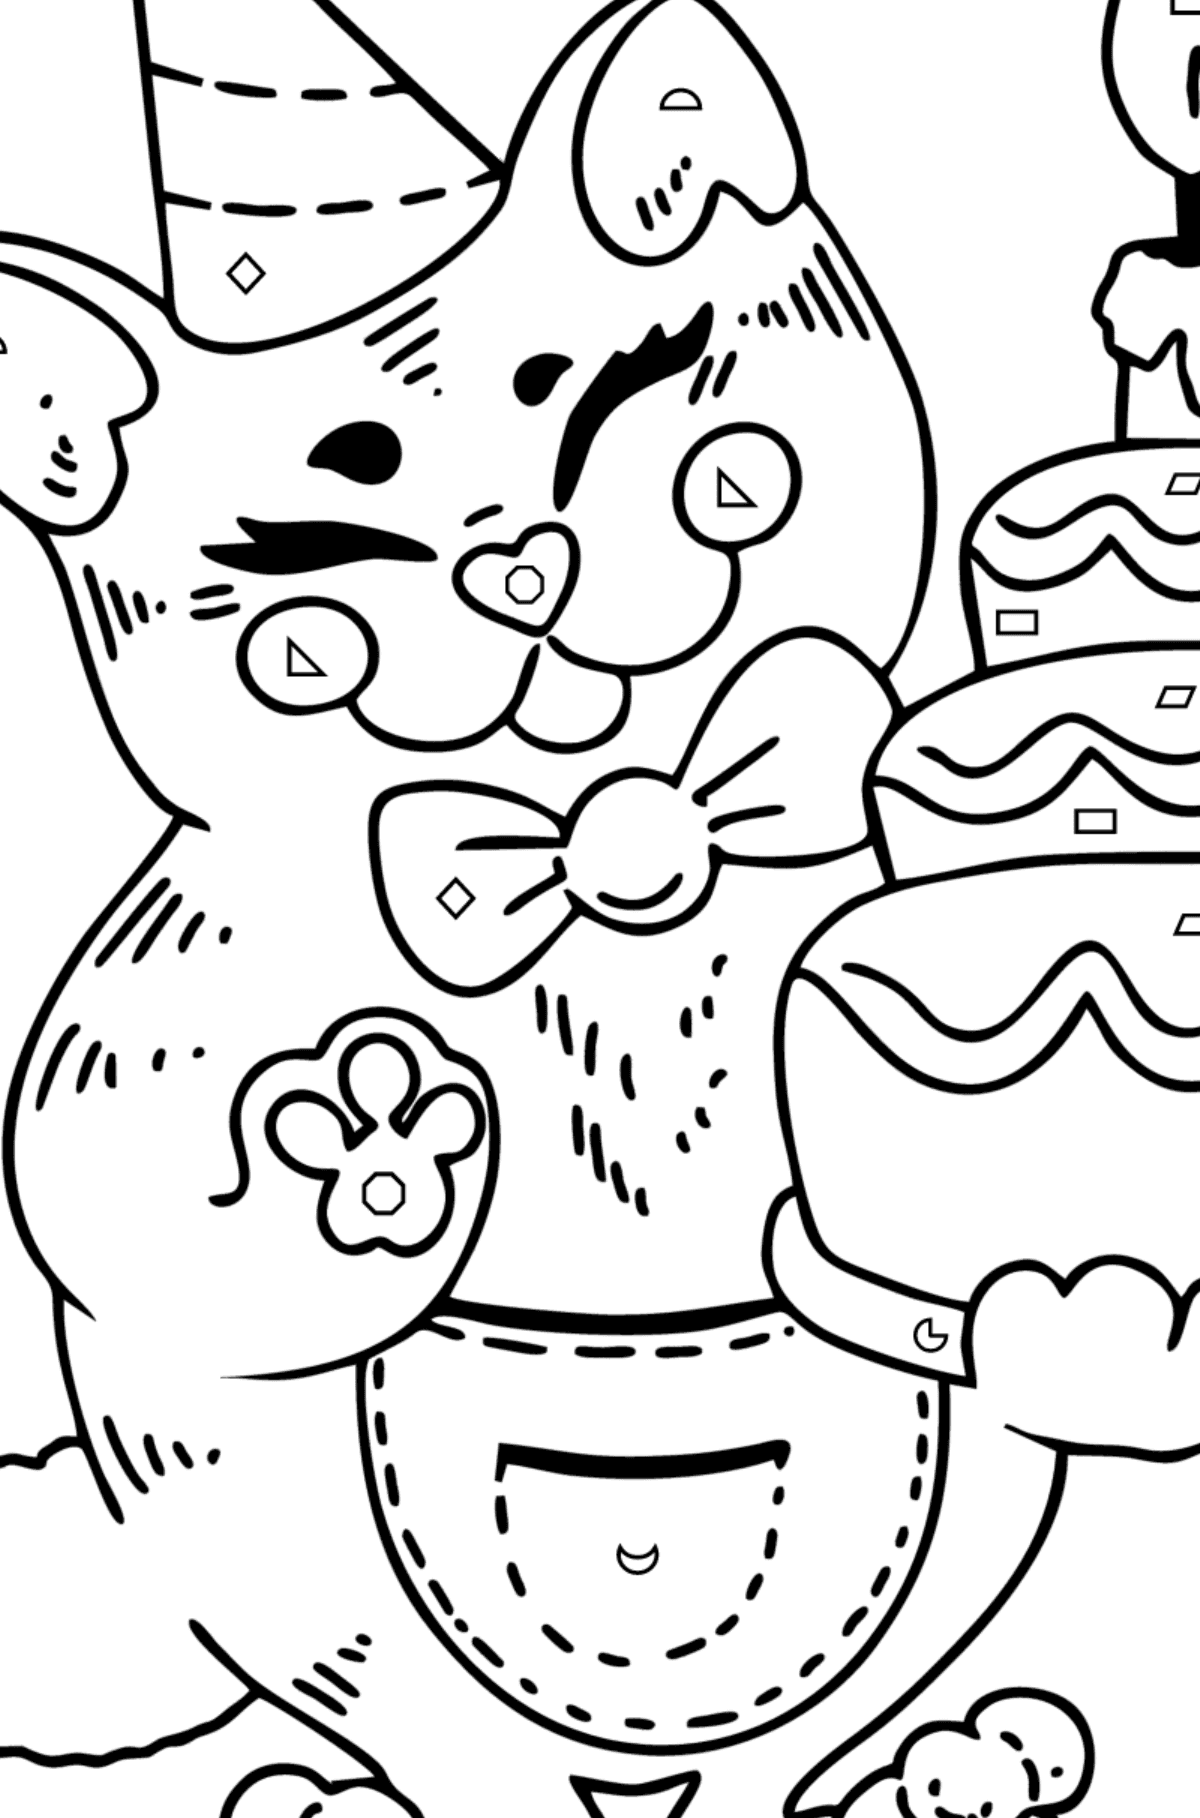 Cat Birthday coloring page - Coloring by Geometric Shapes for Kids